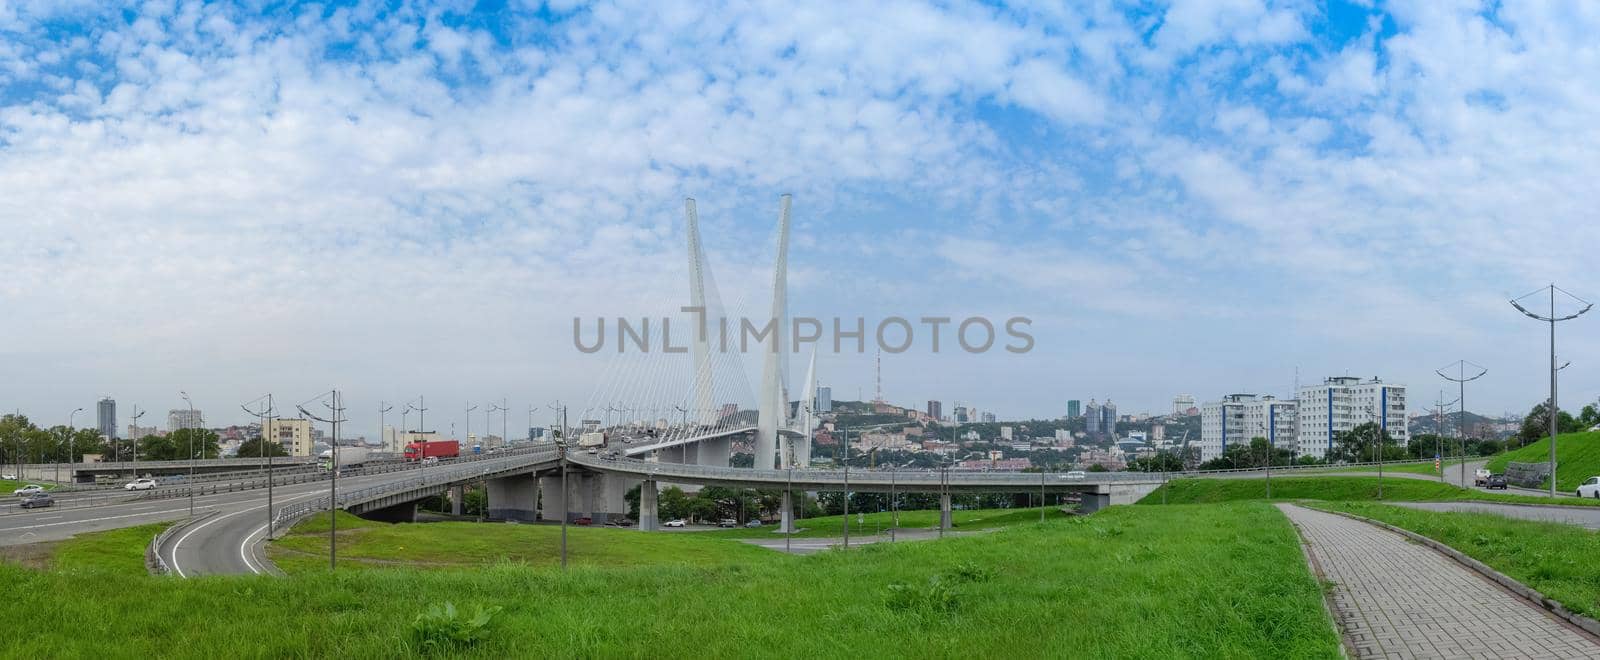 Panorama of the urban landscape overlooking the Golden bridge and highway. by Vvicca